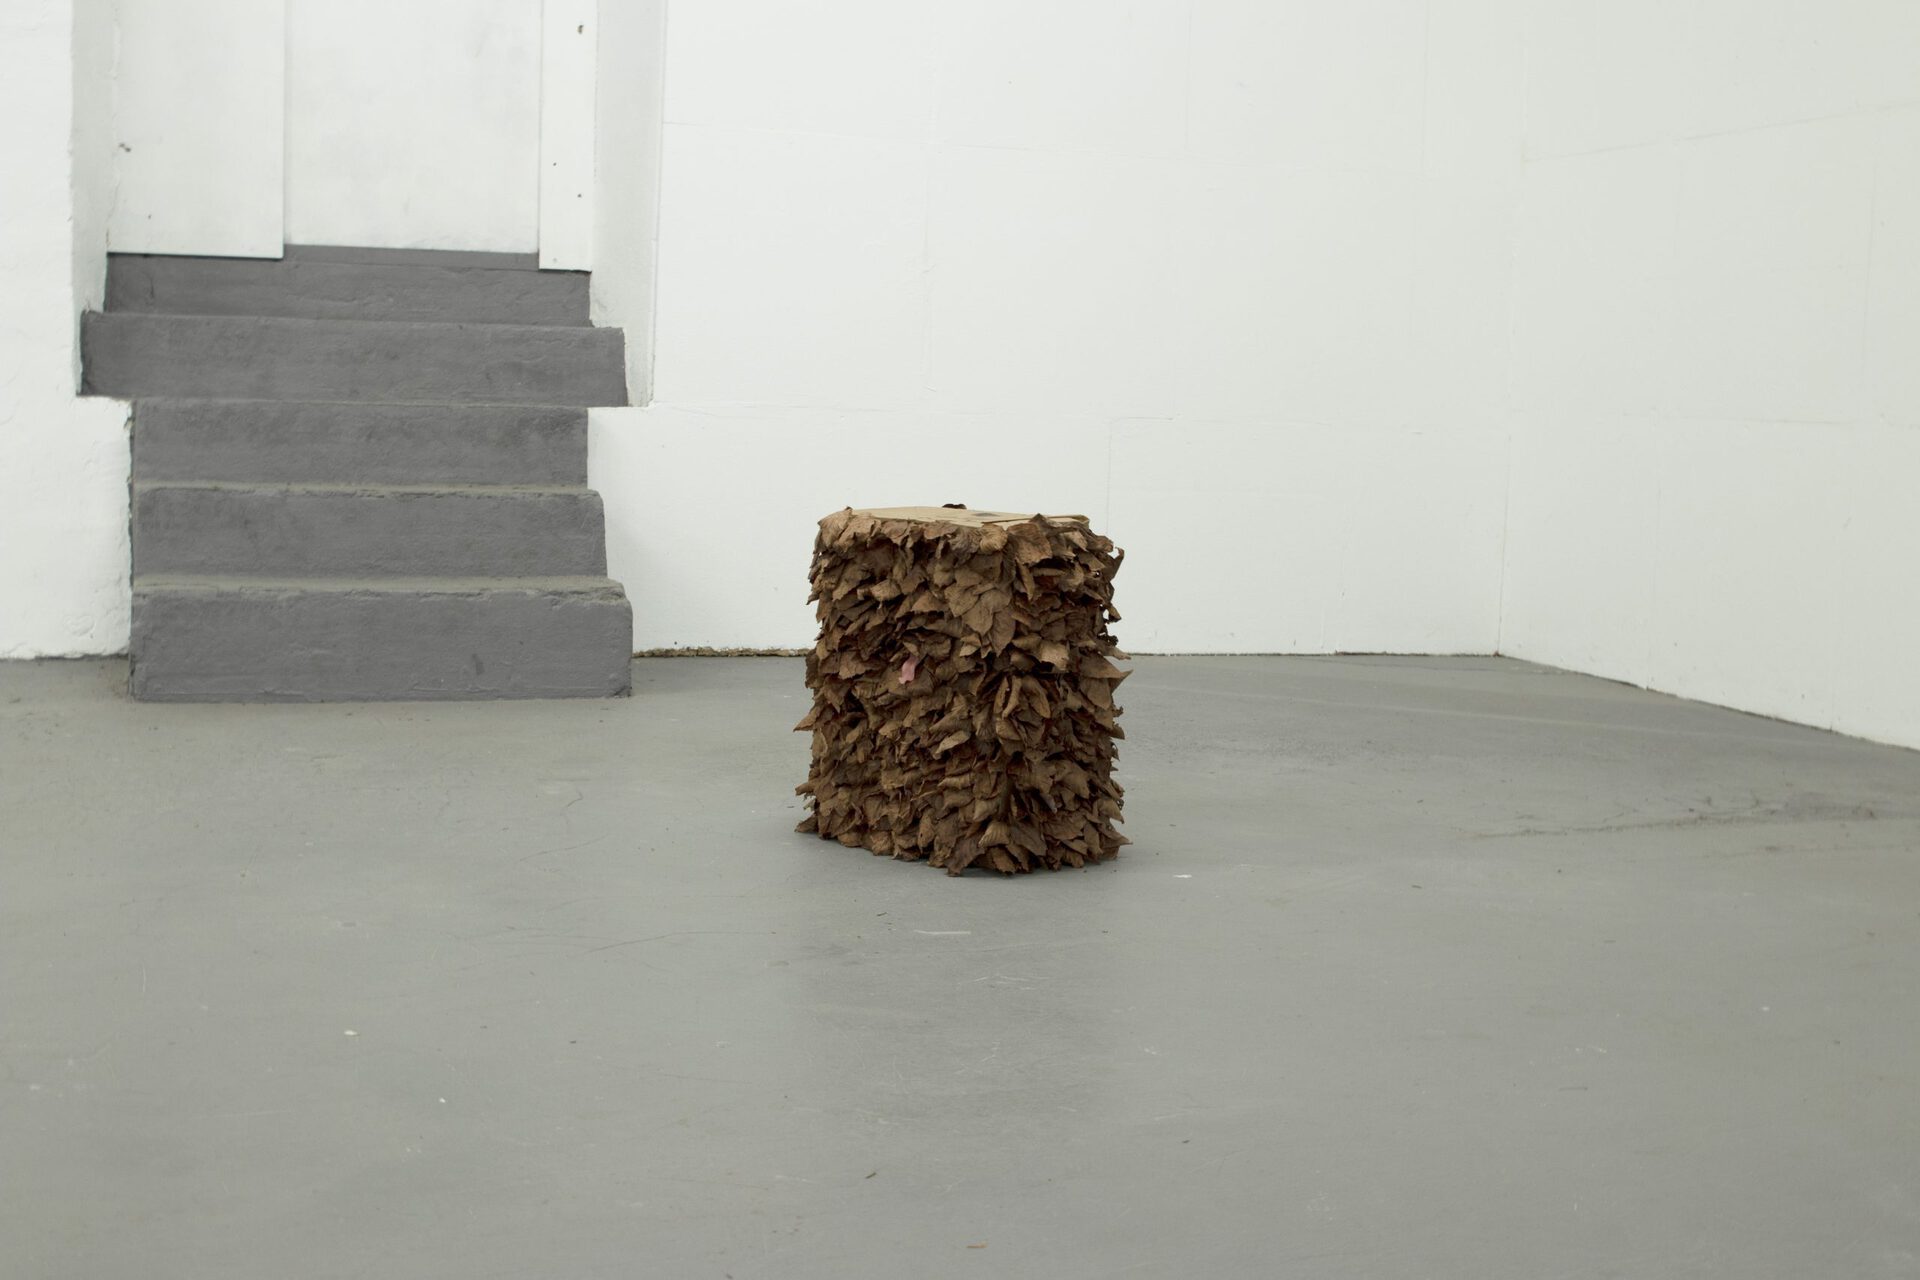 Vincent Scheers, The neighbours, 2020, Paperbag,leaves, taxidermy tongue, 20x40x60cm